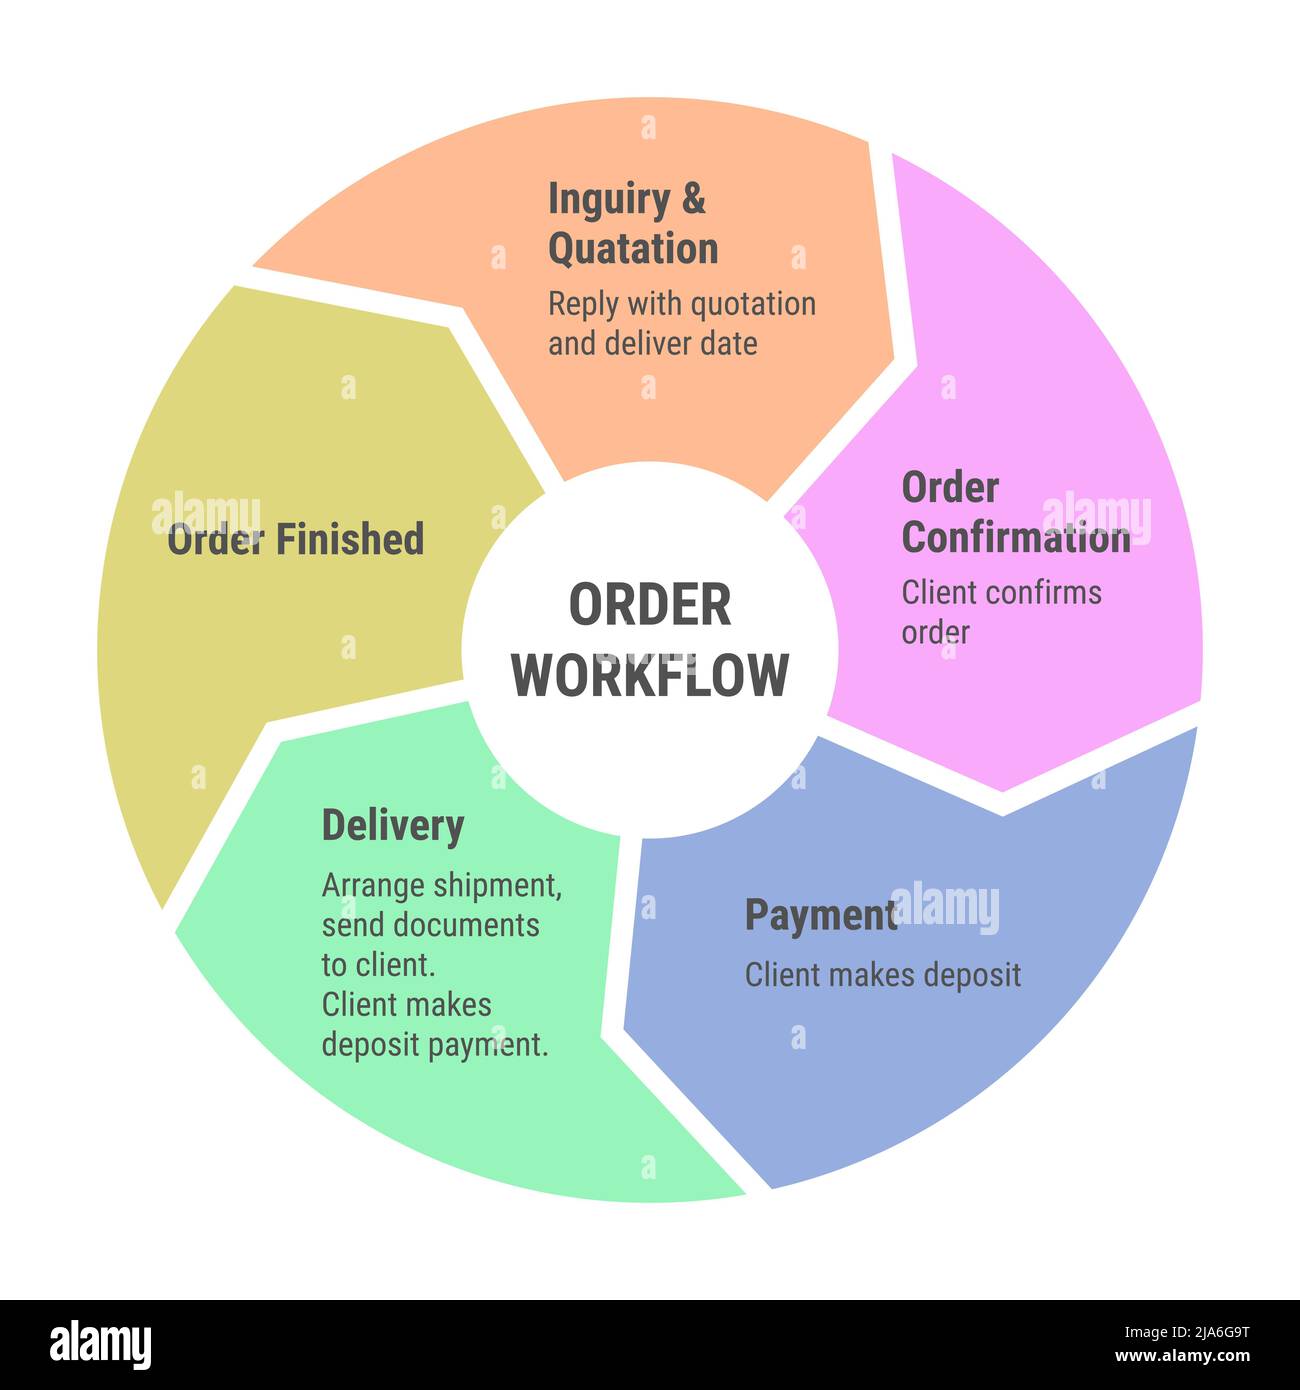 Order workflow lifecycle infographics. 5 arrows circle diagram with inquiry and quatation, confirmation, payment and delivery. Multicolored on white b Stock Vector